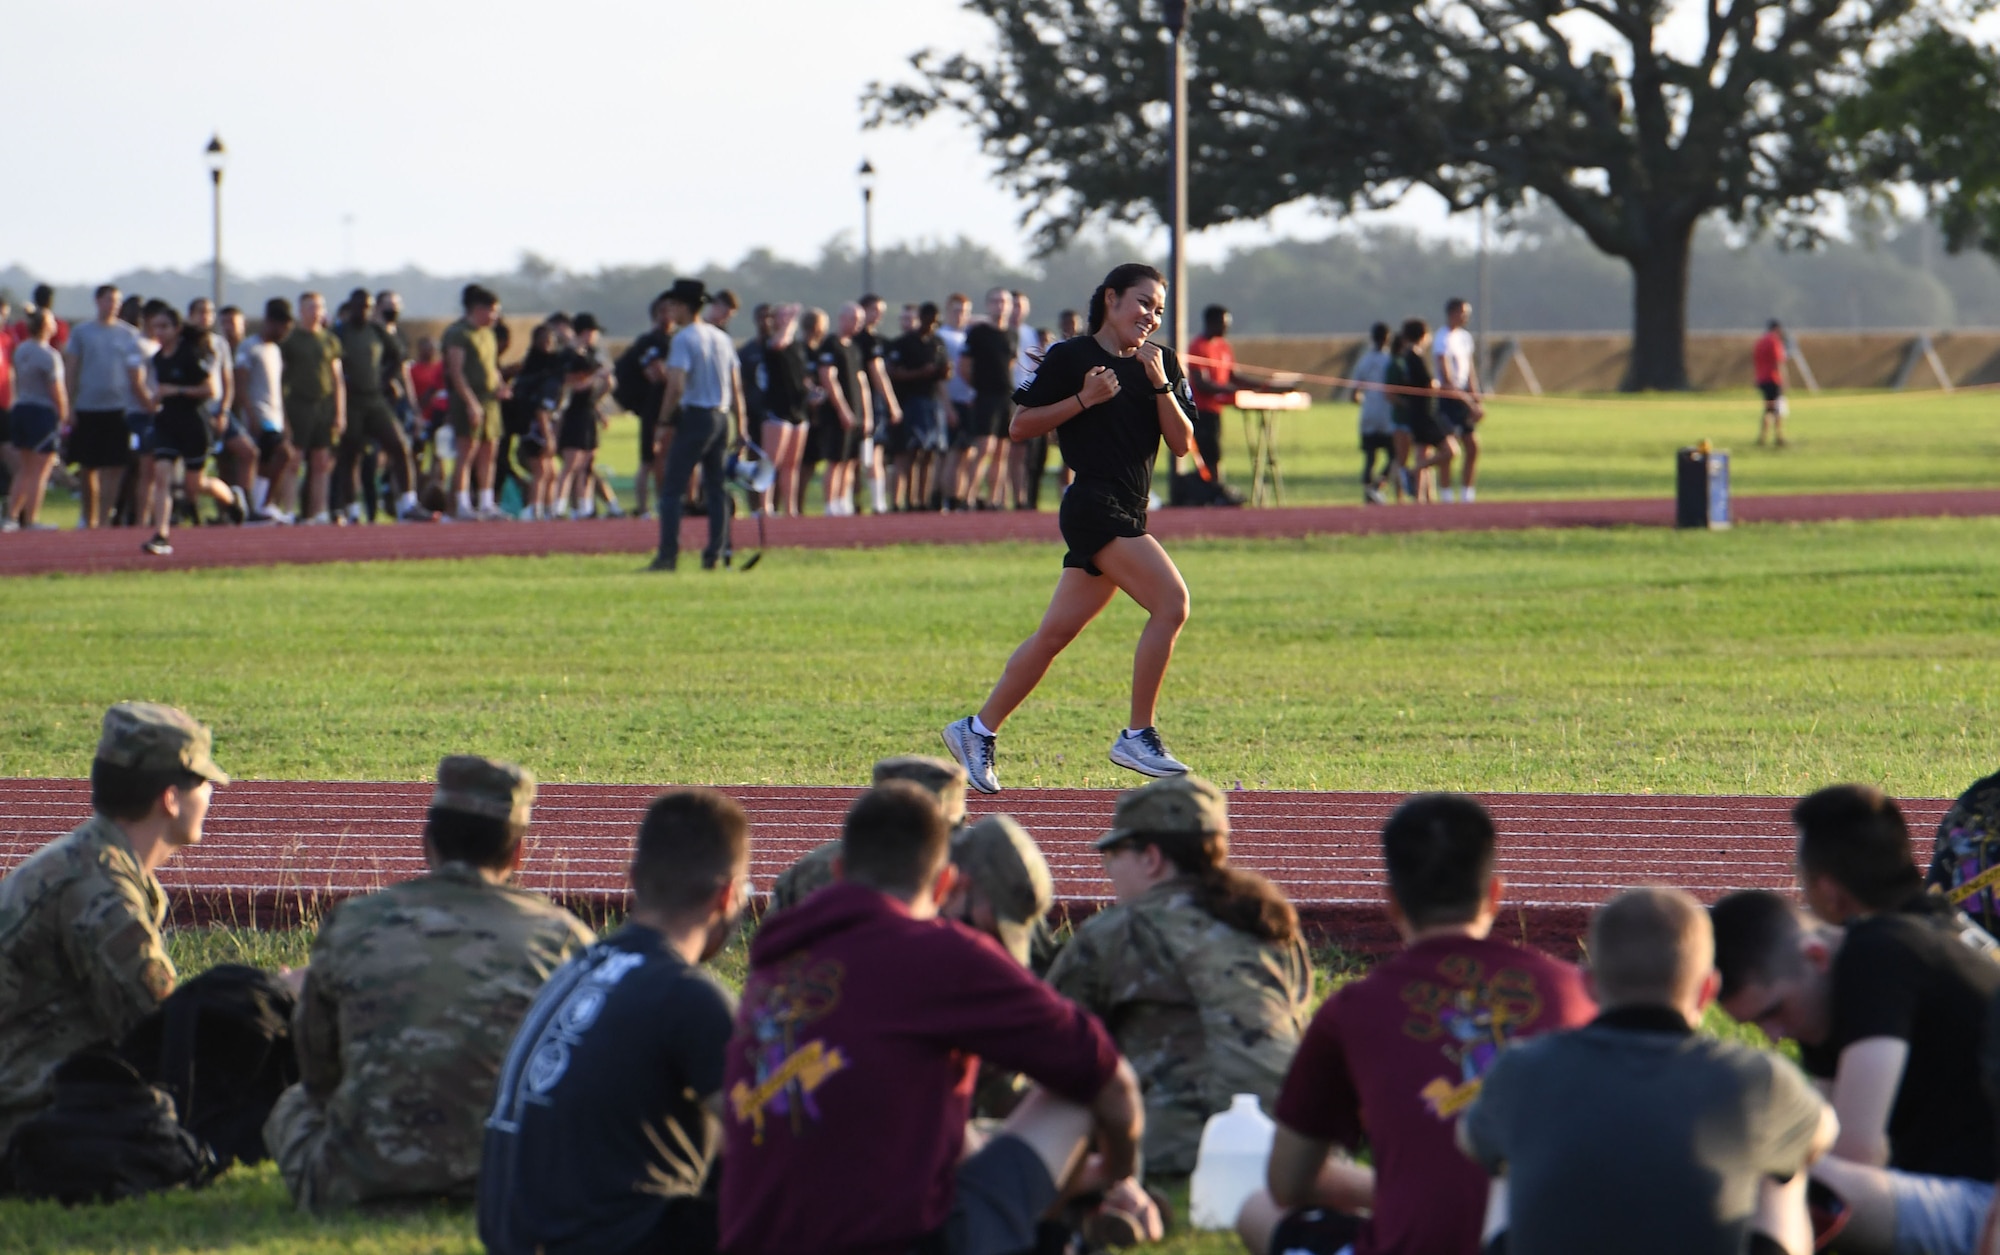 U.S. Air Force Airman 1st Class Saowalak Wester, 338th Training Squadron student, participates in the 1600 meter run during the 81st Training Group Olympics at Keesler Air Force Base, Mississippi, June 11, 2021. The event also included competitions in weight lifting, long jump, shot put and discus. (U.S. Air Force photo by Kemberly Groue)